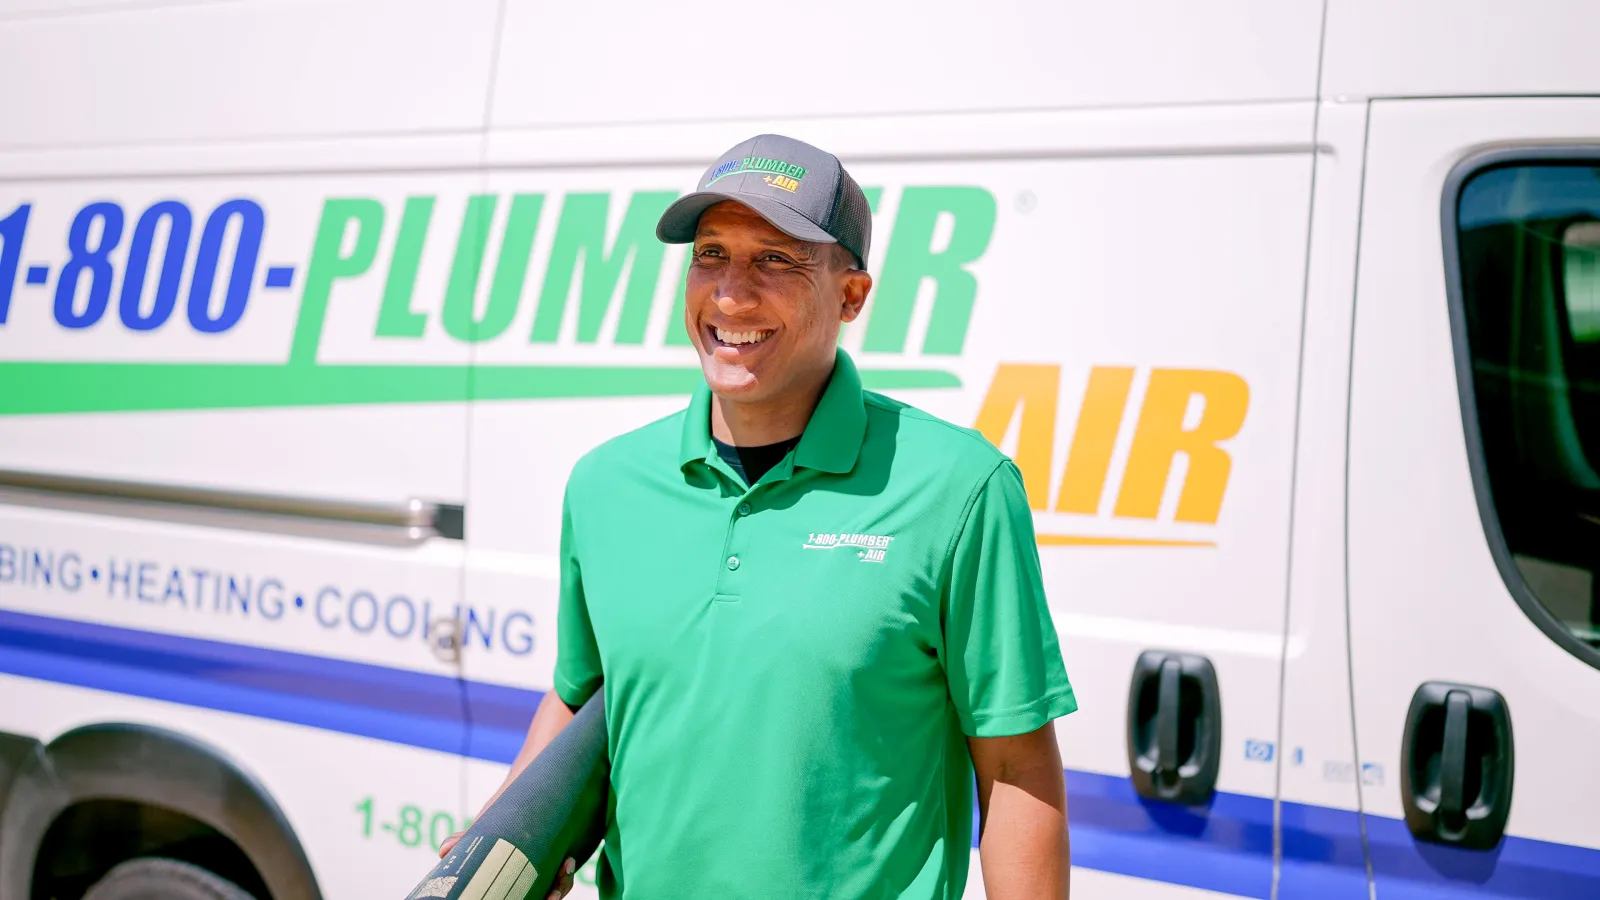 A Houston heating technician standing in front of a van